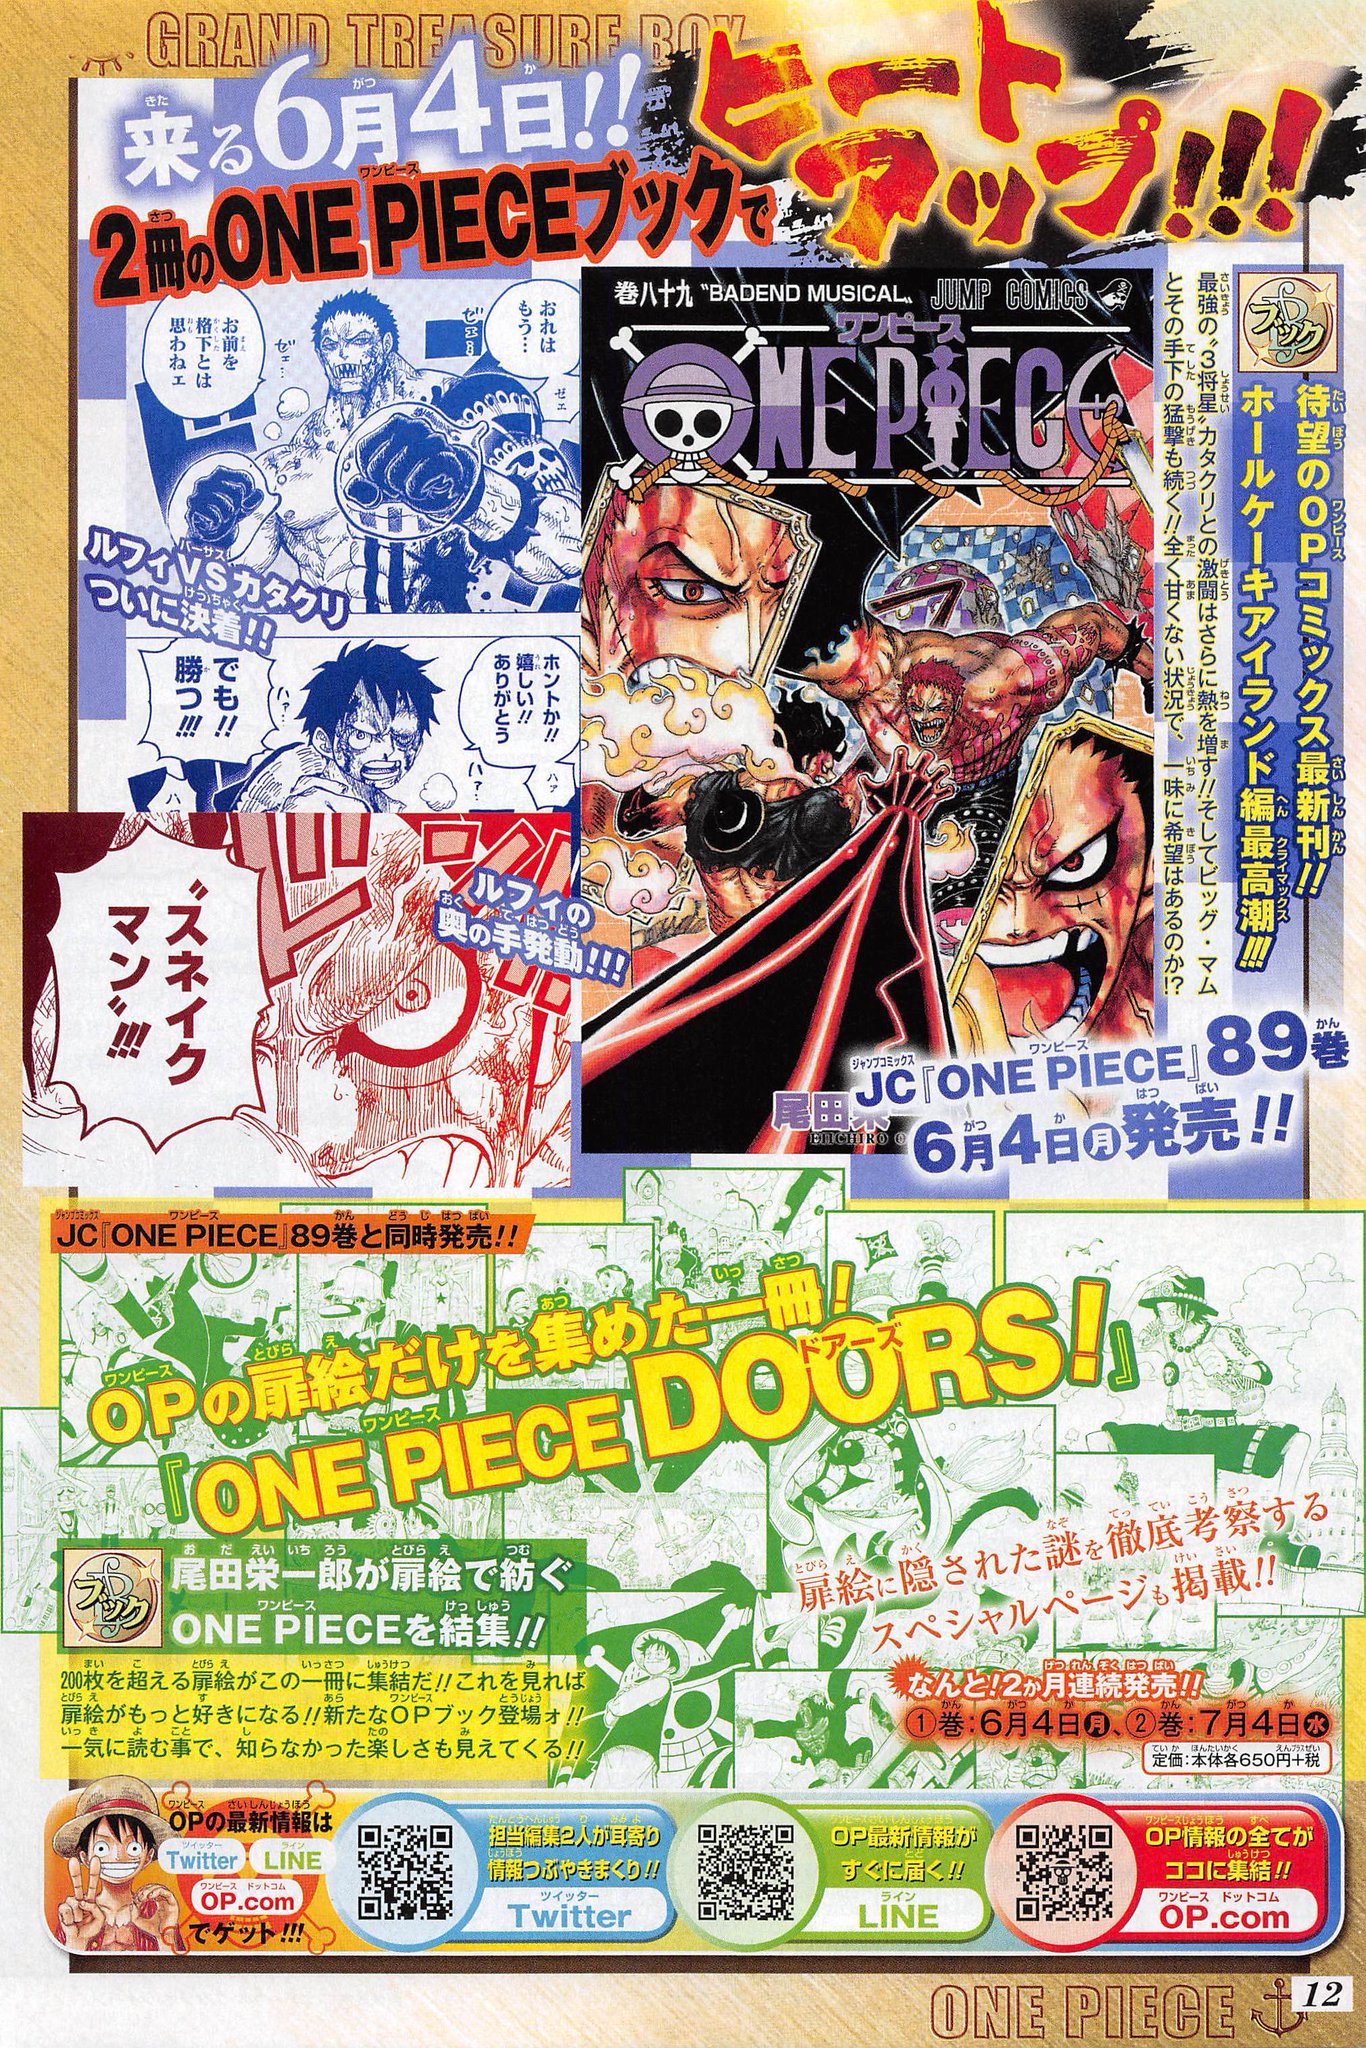 Yonkouproductions One Piece Volume Cover Releases June 4th One Piece Doors Will Be Released In 2 Volumes Featuring A Compilation Of The Cover Story Series From The Manga On